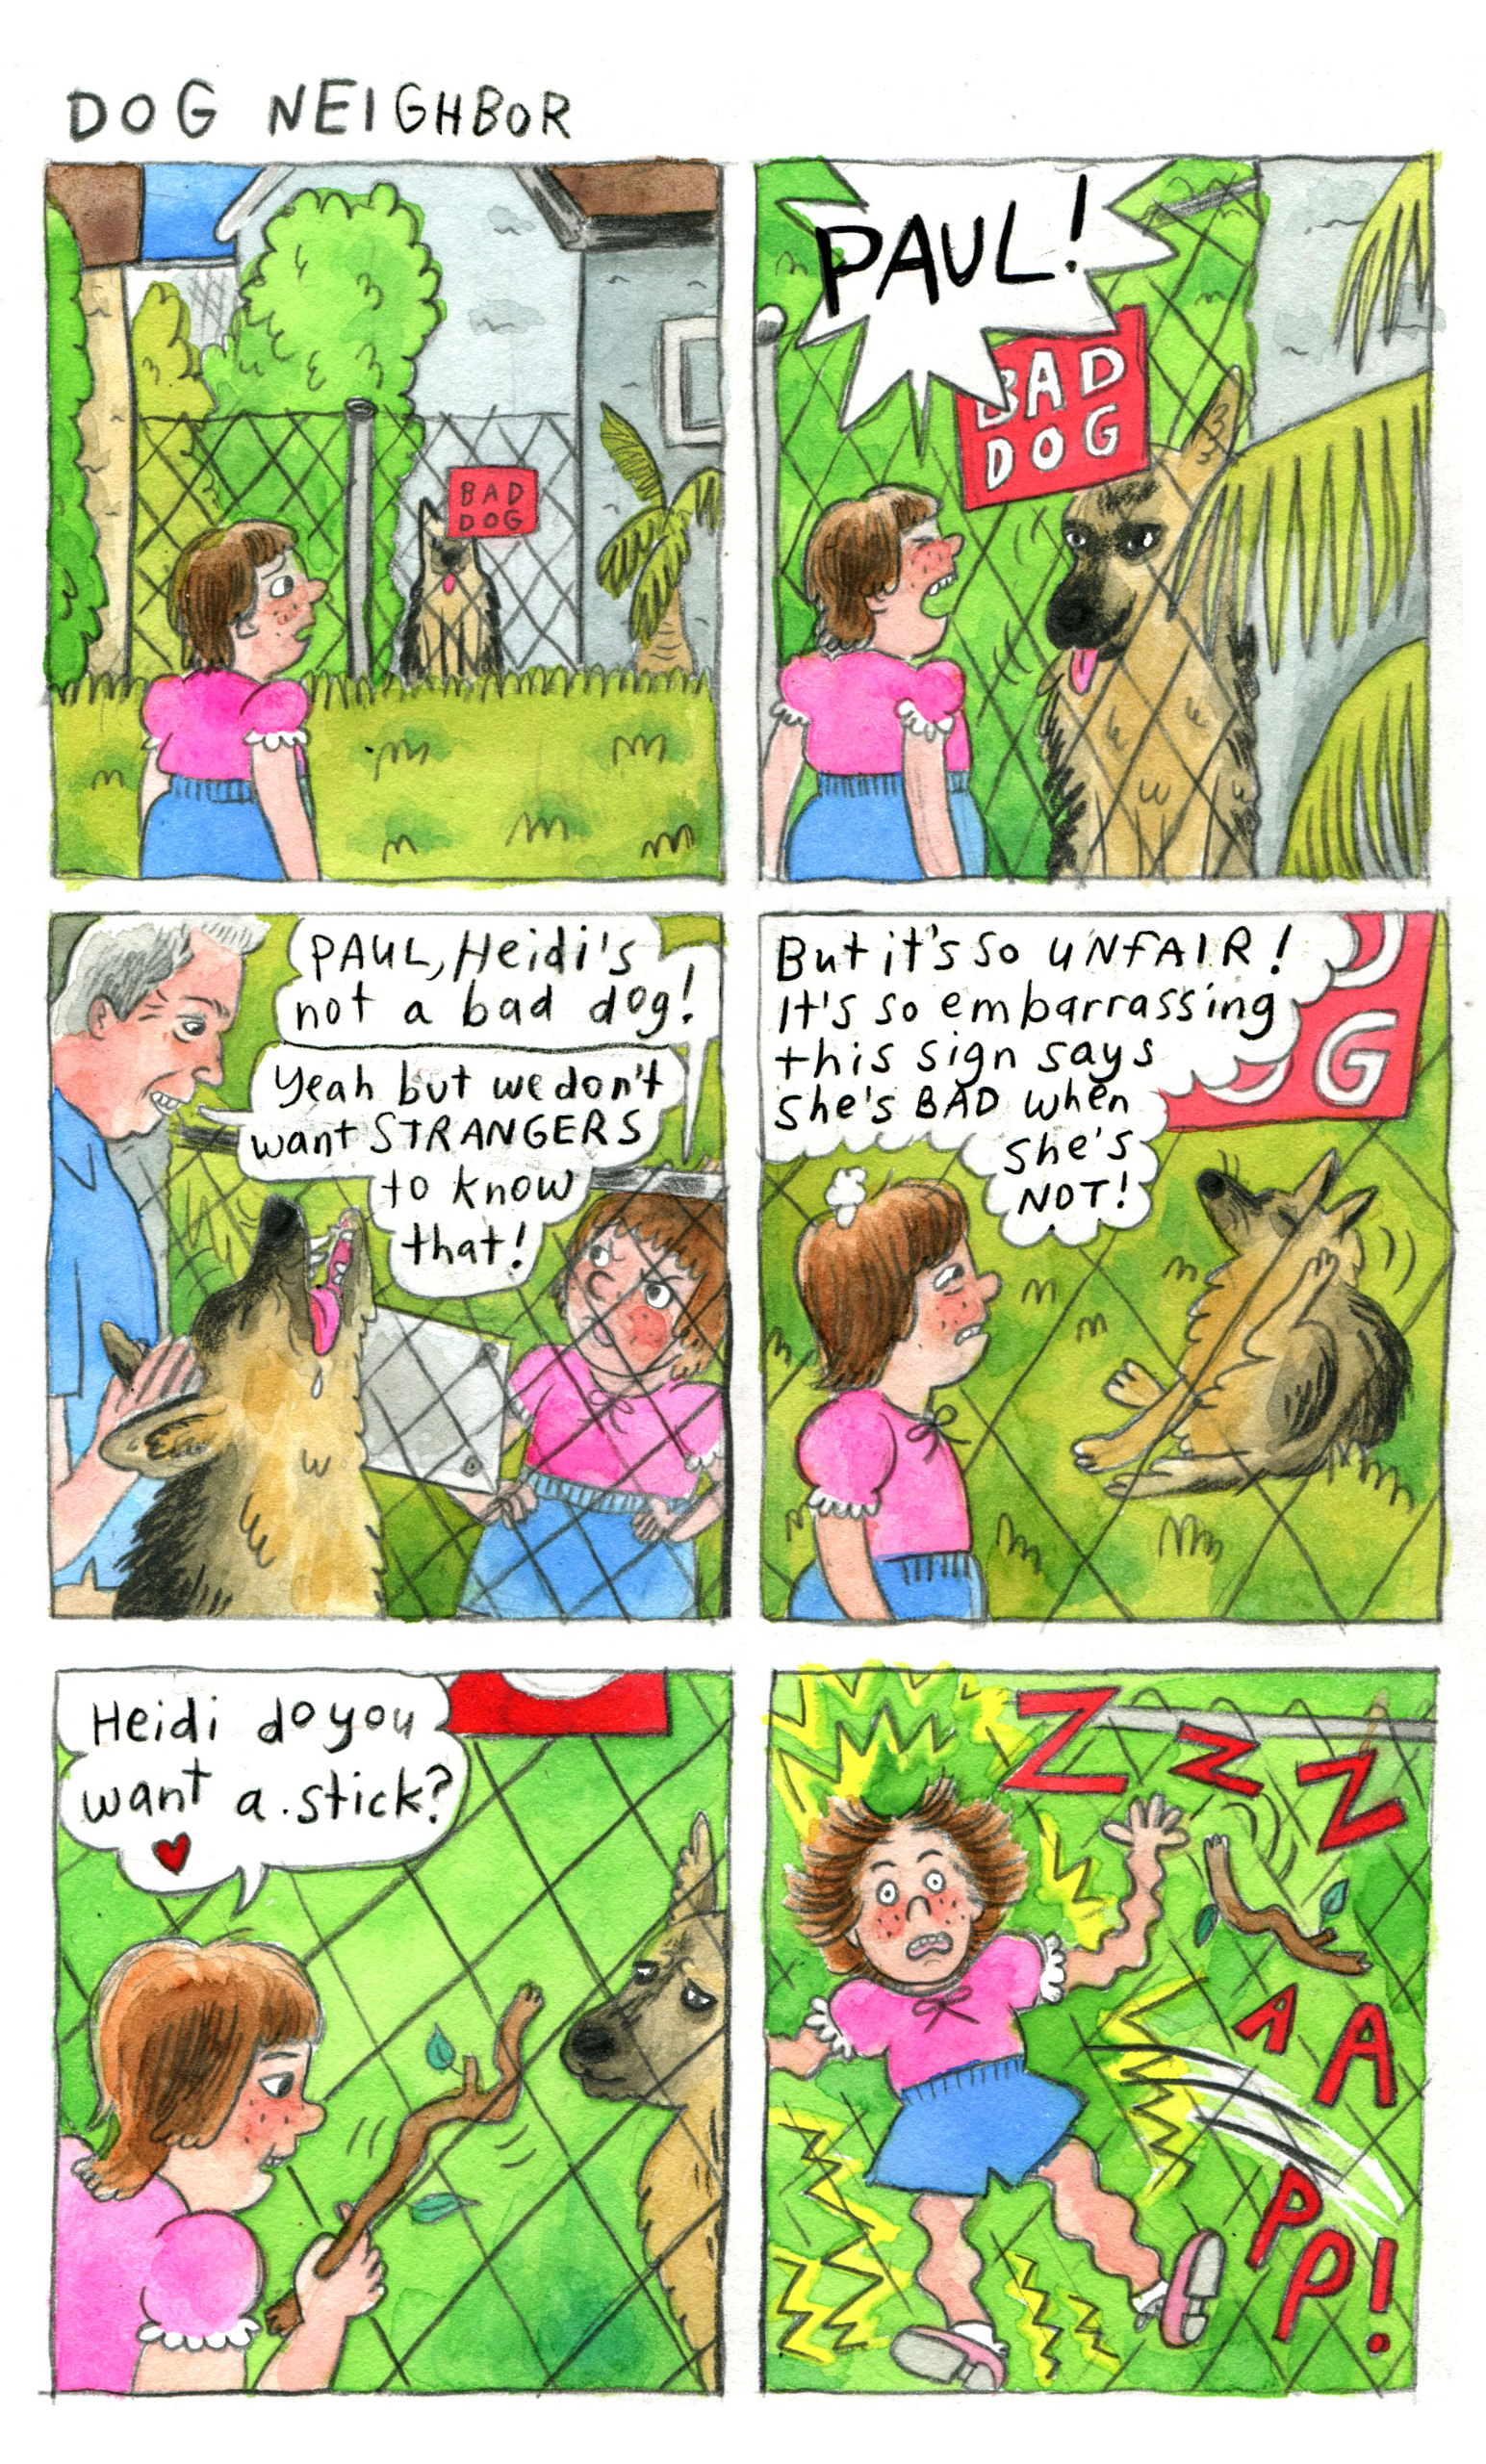 A 6 panel comic rendered in bright watercolors and hand lettered font in typical Davis style, titled "Dog Neighbor."

A young girl with short brown hair and bangs wears a pink blouse and blue shorts. She appears sad and concerned as she looks at a dog behind a fence of someone's house. The dog's tongue is out and she sits politely. Partially blocking the dog's face is a red sign on the fence reading "bad dog." The girl approaches the dog as close as the fence allows. The dog's tongue is still out and she looks calm in front of the girl. Eyes closed and brows furrowed, the girl angrily shouts, "PAUL!" An older man with short gray hair comes, petting the now-happy dog. The girl, hands on hips, sternly says, "Paul, Heidi's not a bad dog!" The man grins and says, "Yeah but we don't want STRANGERS to know that!"

Heidi the dog now sits in the grass, scratching behind her ear and looking unbothered. The girl looks conflicted and pained as she thinks, "But it's so UNFAIR! It's so embarrassing this sign says she's BAD when she's NOT!"

The girl leans in close and holds up a stick to Heidi. She lovingly asks, "Heidi do you want a stick?" Heidi looks at the stick with concern. 

The girl gets zapped into the air when she touches the apparently electric fence. Her hand stands up wildly, her limbs are squiggly, and she appears utterly shocked by this development.